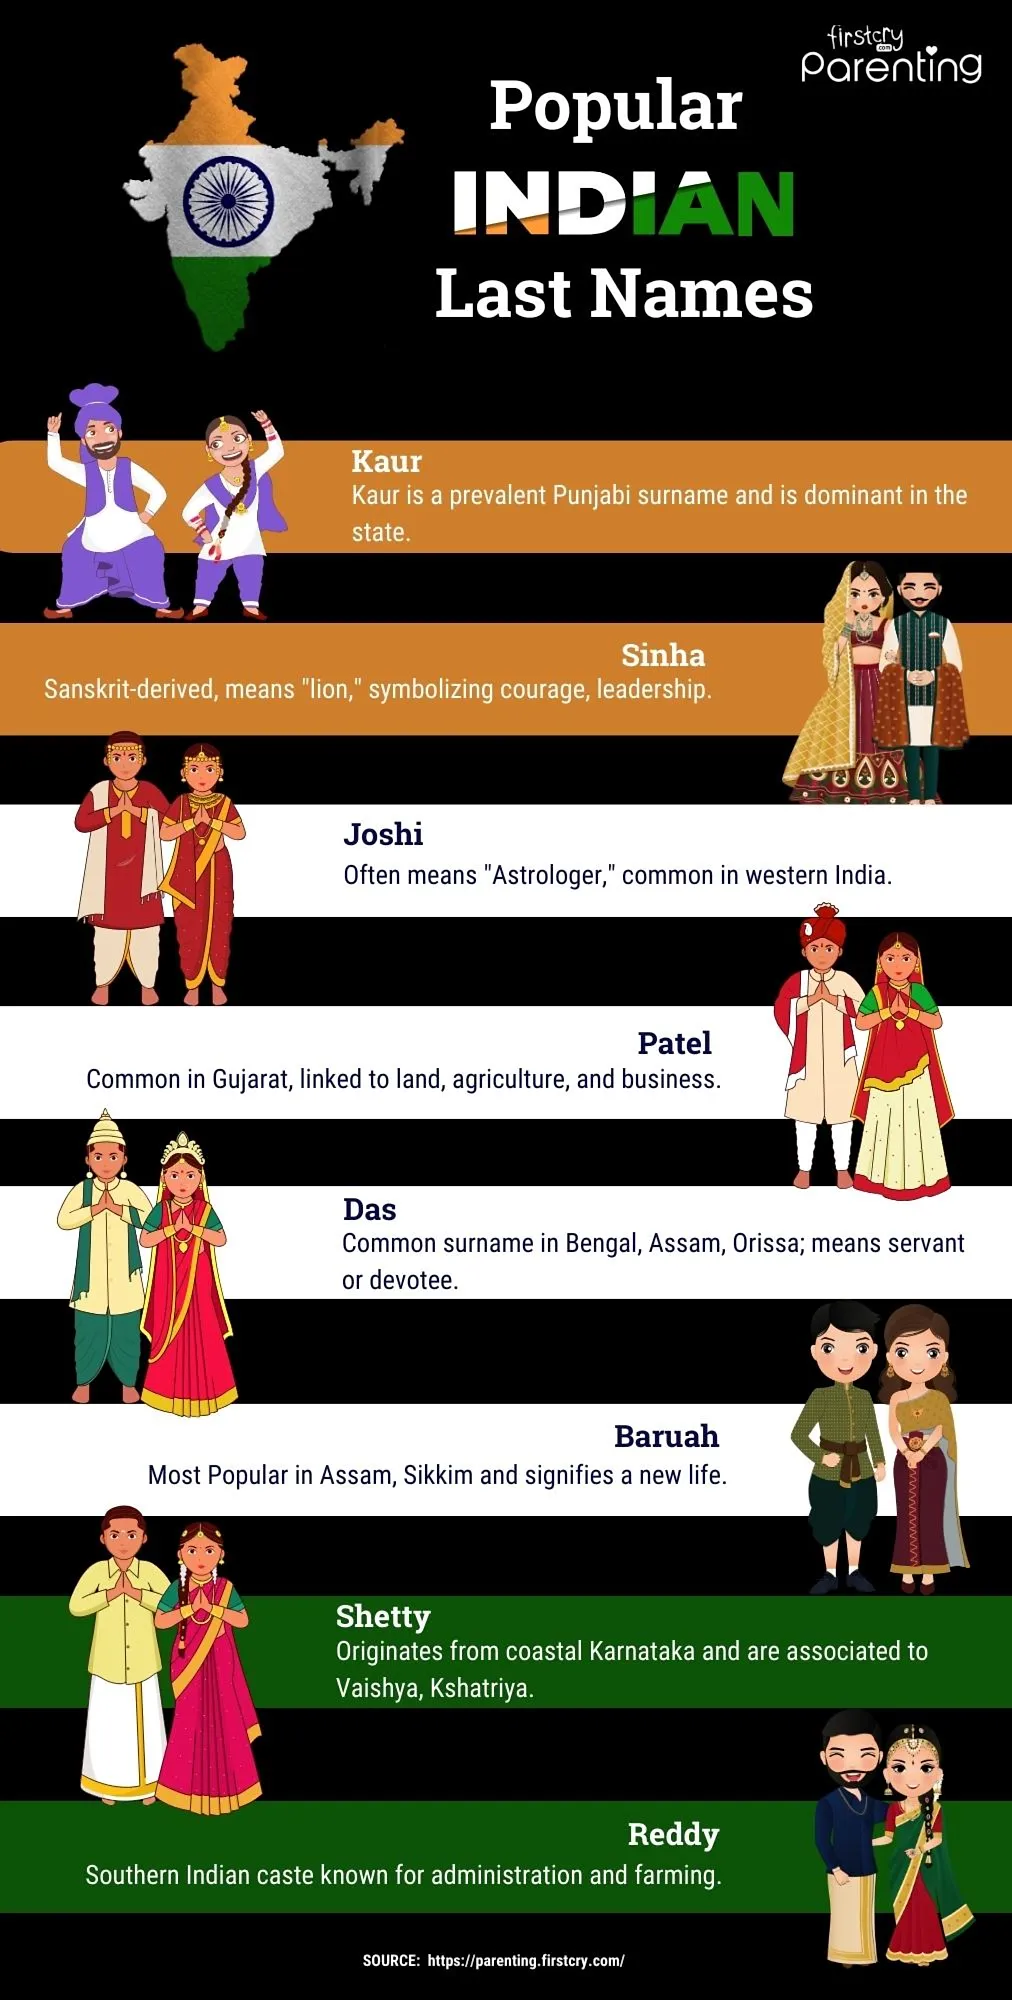 Popular Indian Last Names or Surnames - Infographic